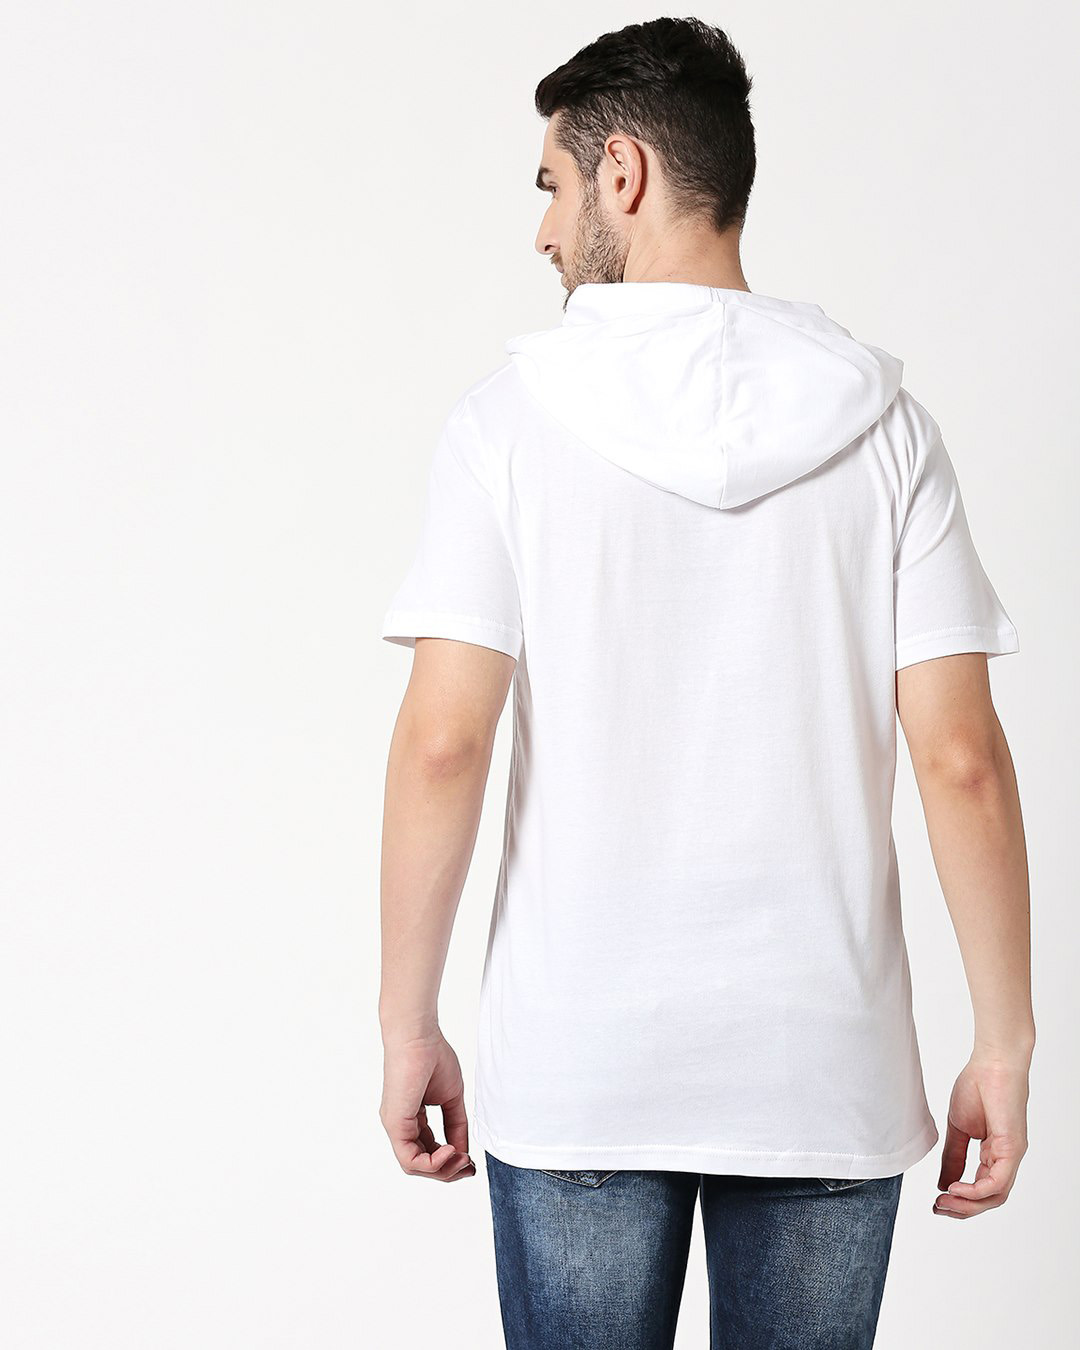 Shop Young forever Half Sleeve Hoodie T-Shirt White-Back